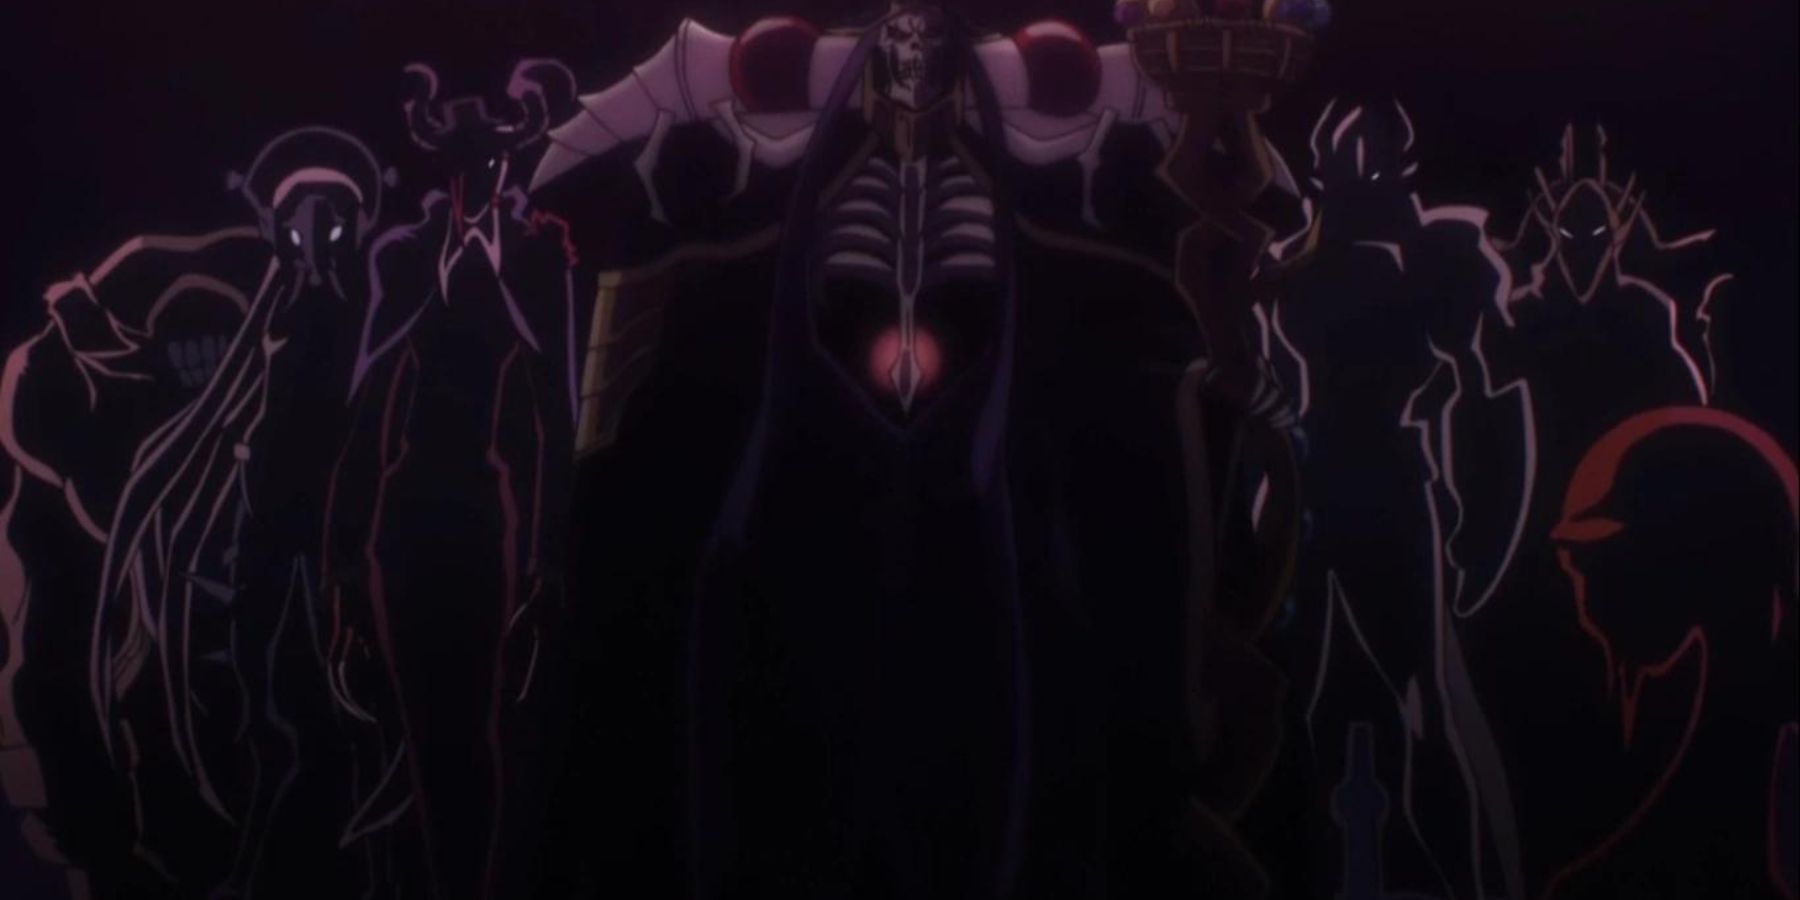 Ainz Ooal Gown guild Overlord anime